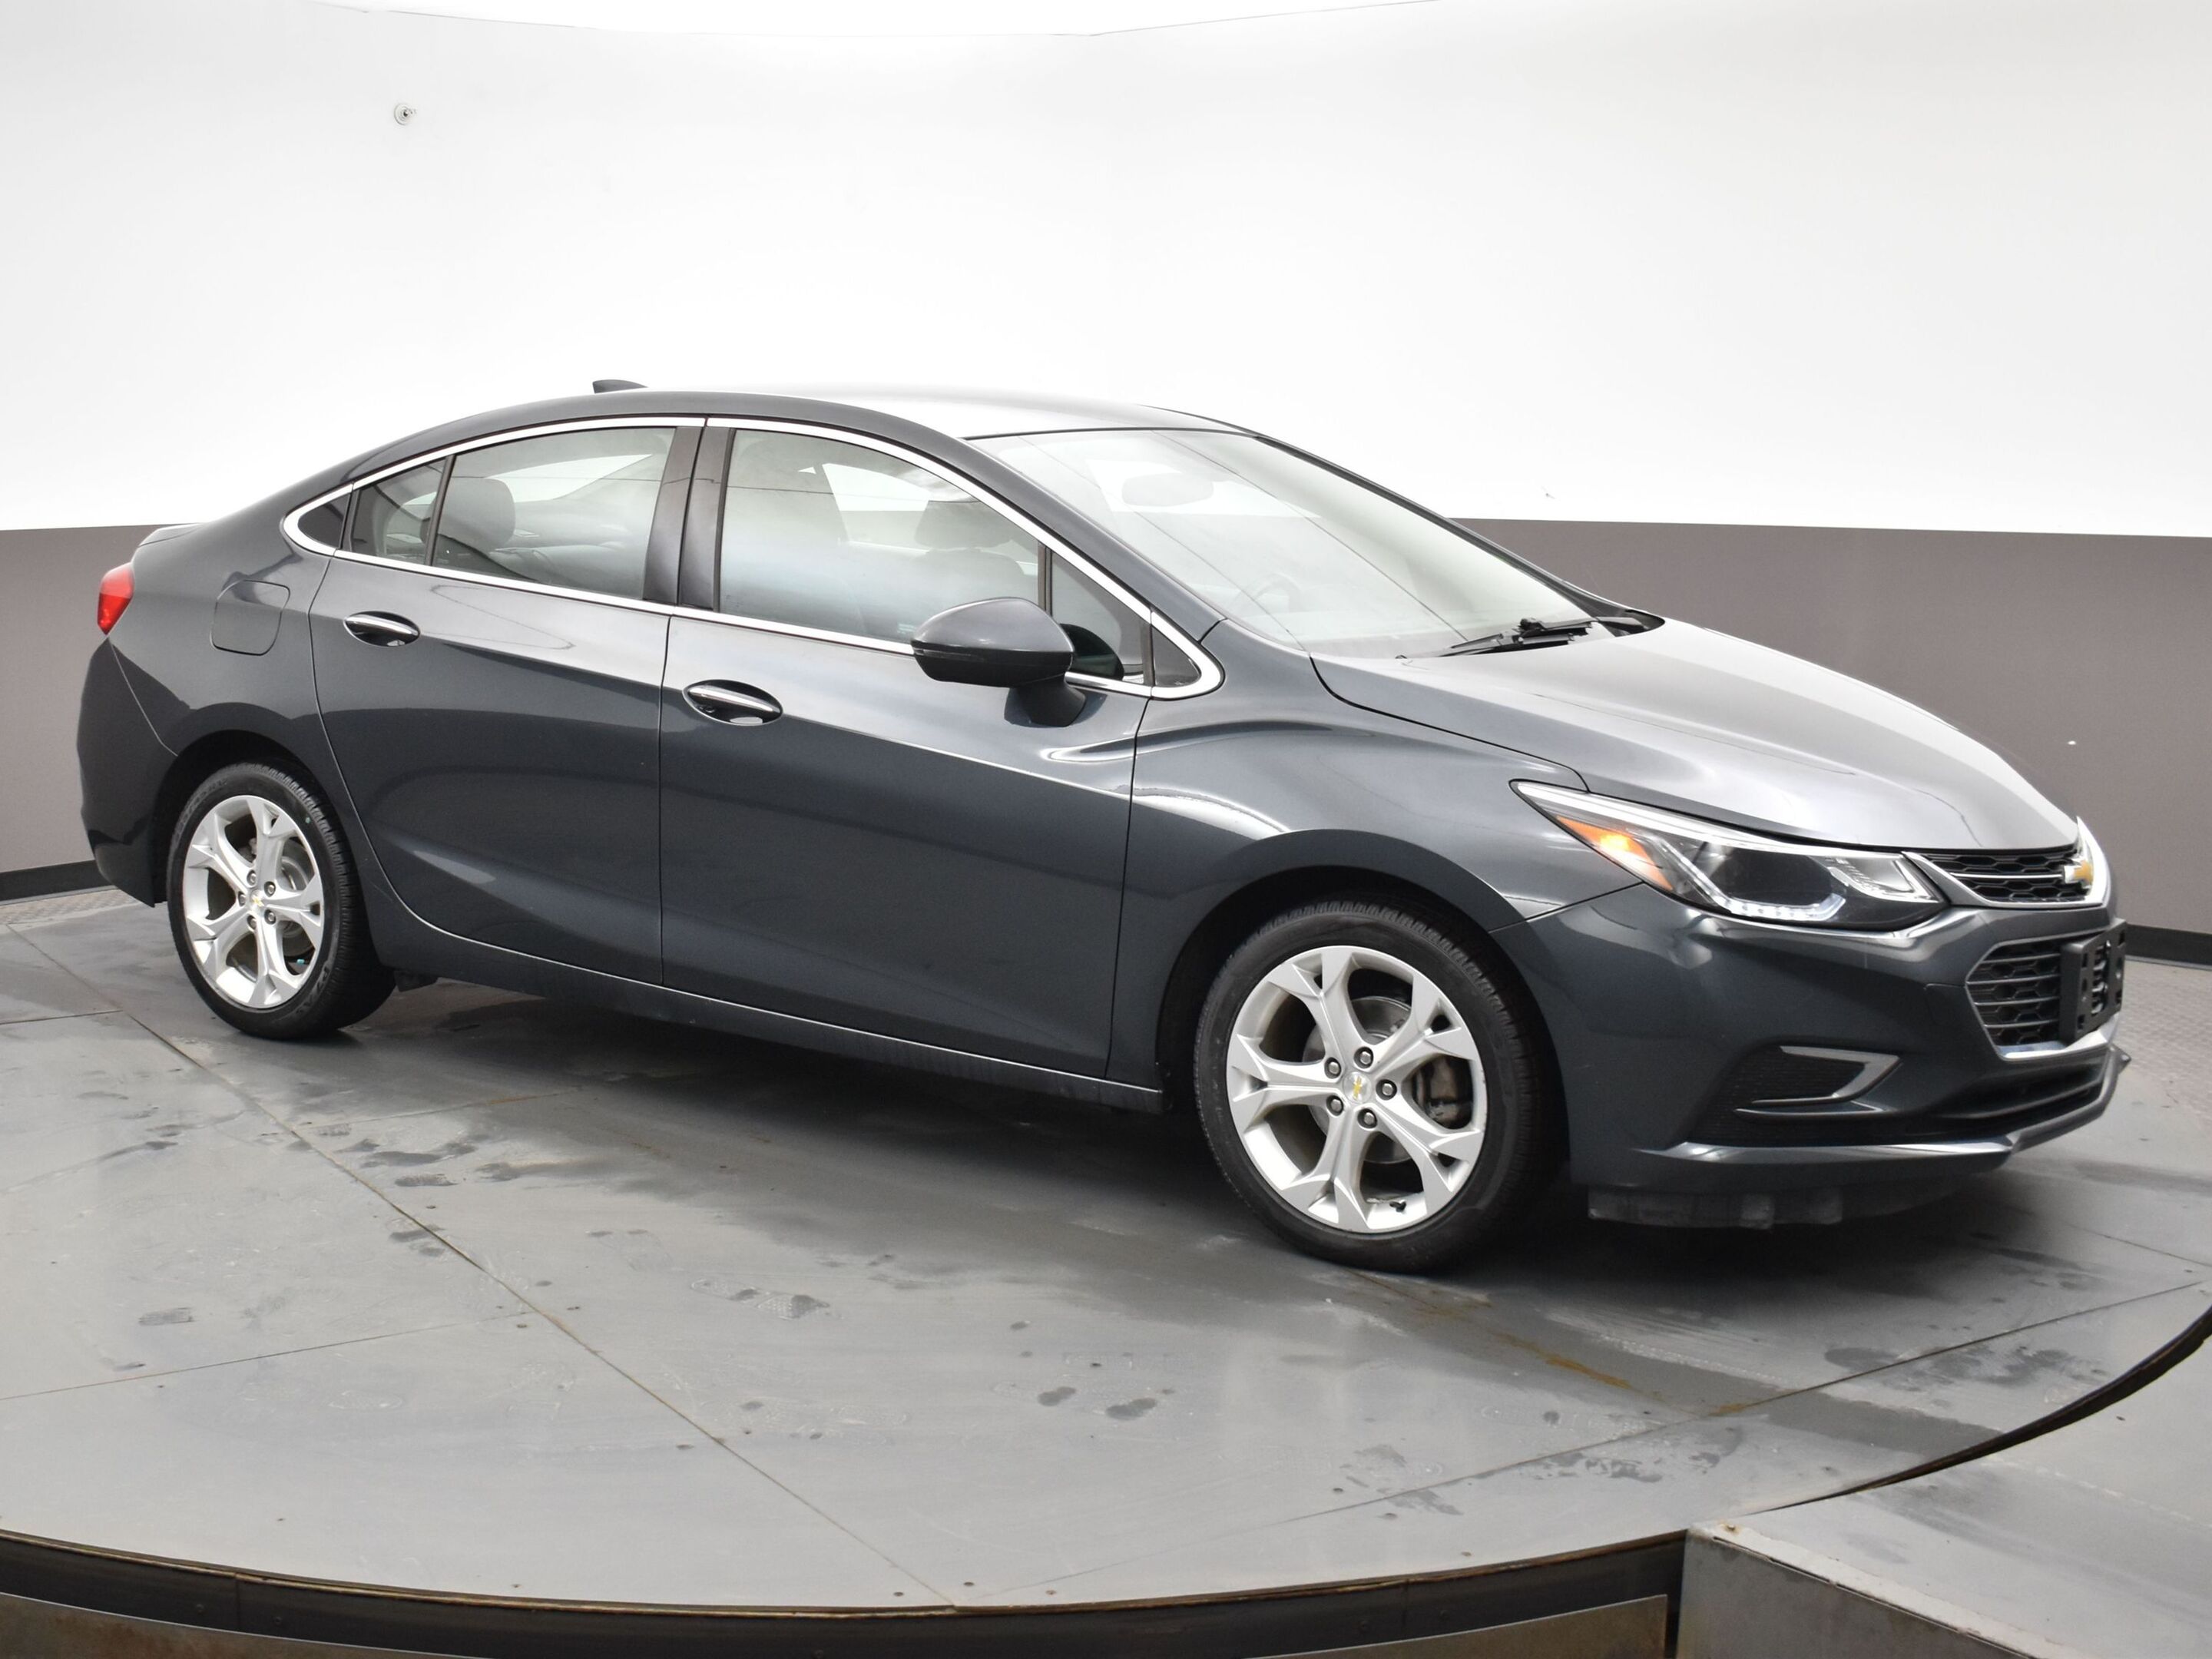 2018 Chevrolet Cruze PREMIER - Call 902-469-8484 To Book Appointment! L